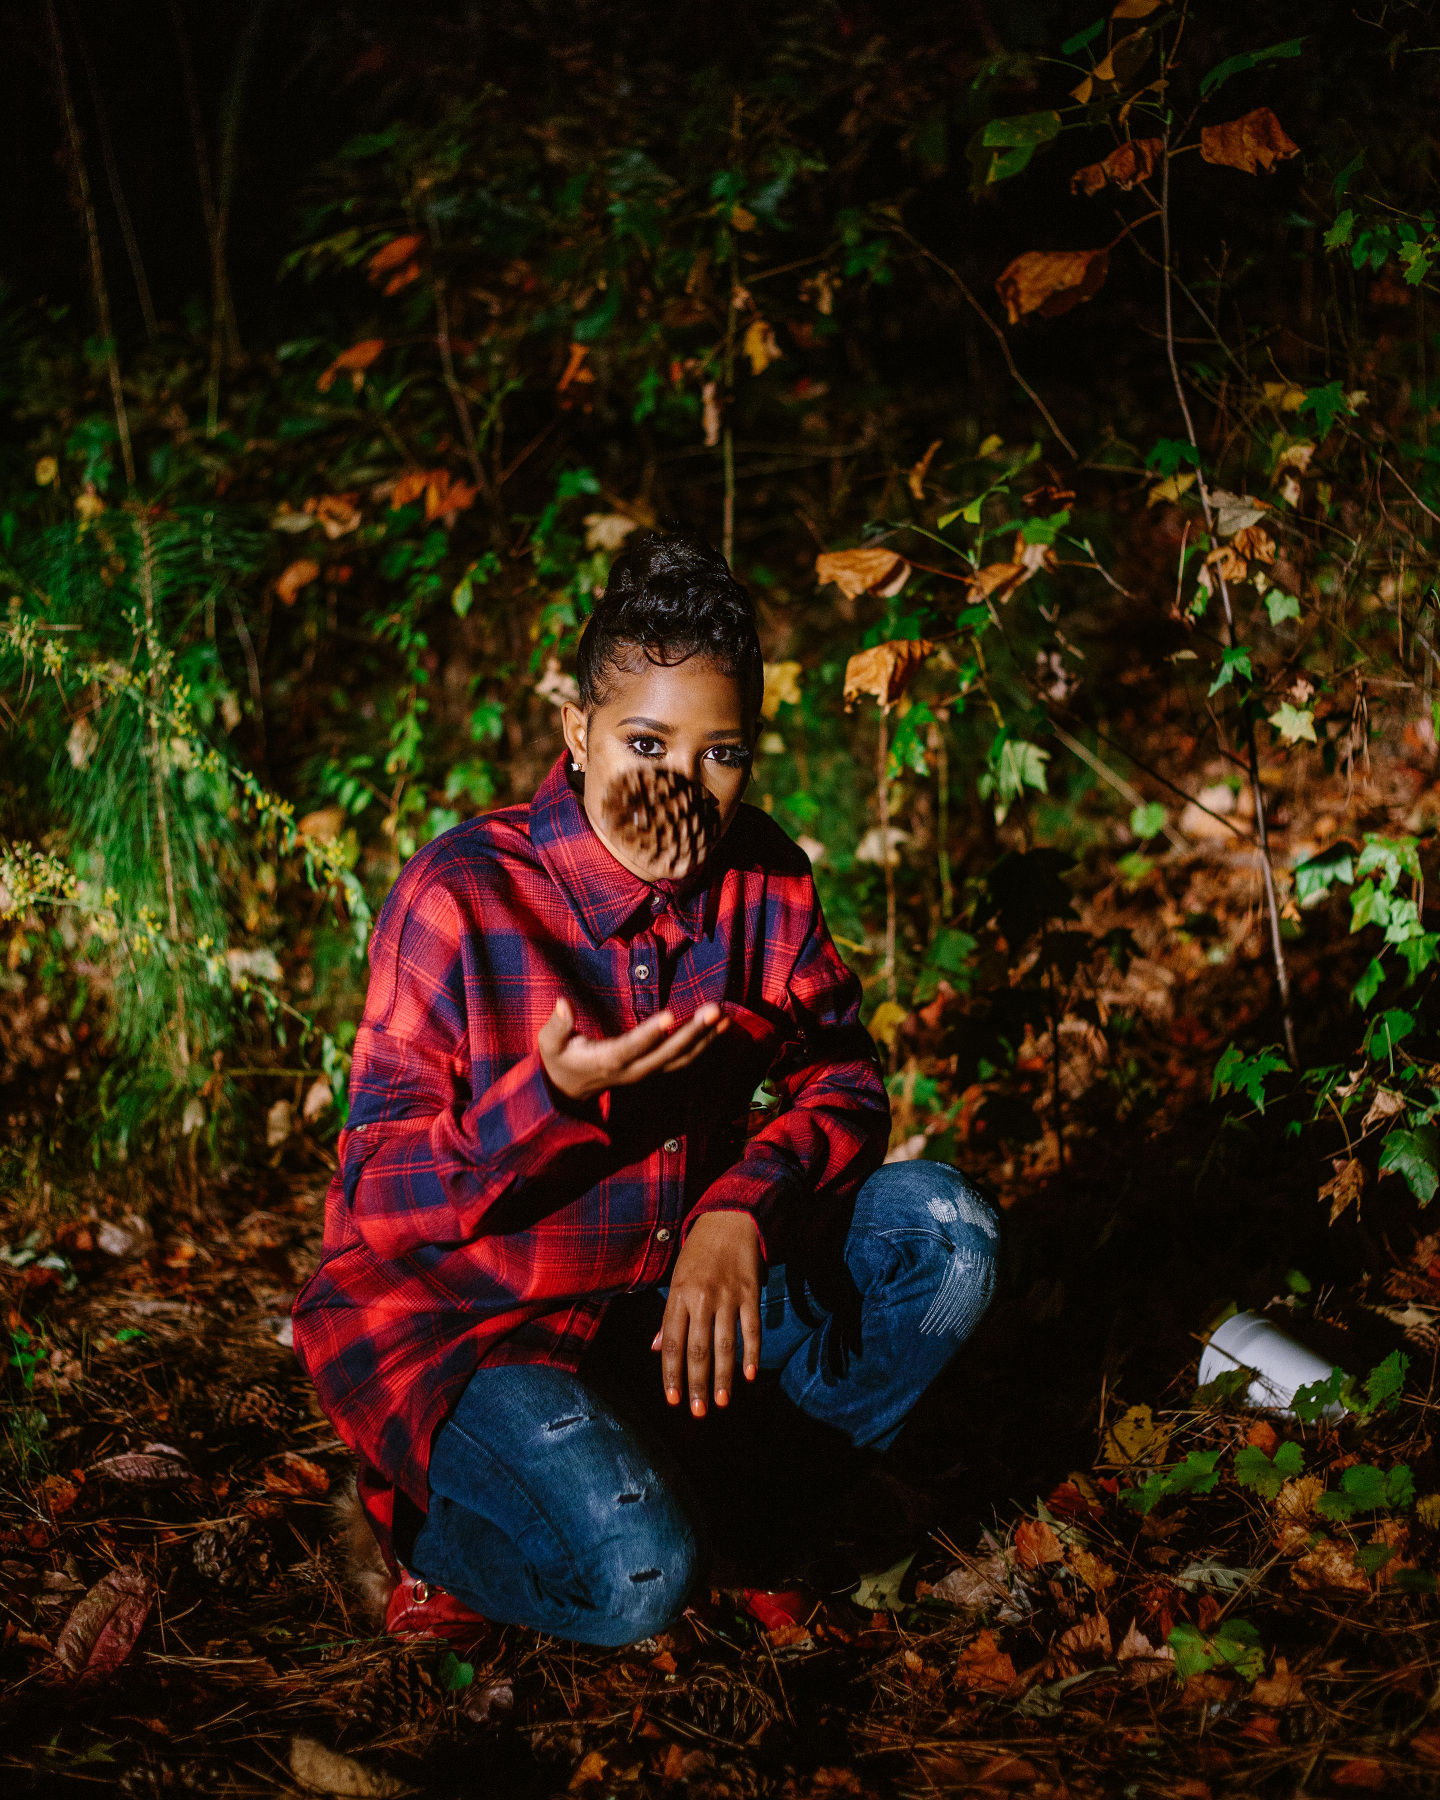 DeJ Loaf Moves In Silence. Now She Wants To Share Her Voice With The World.